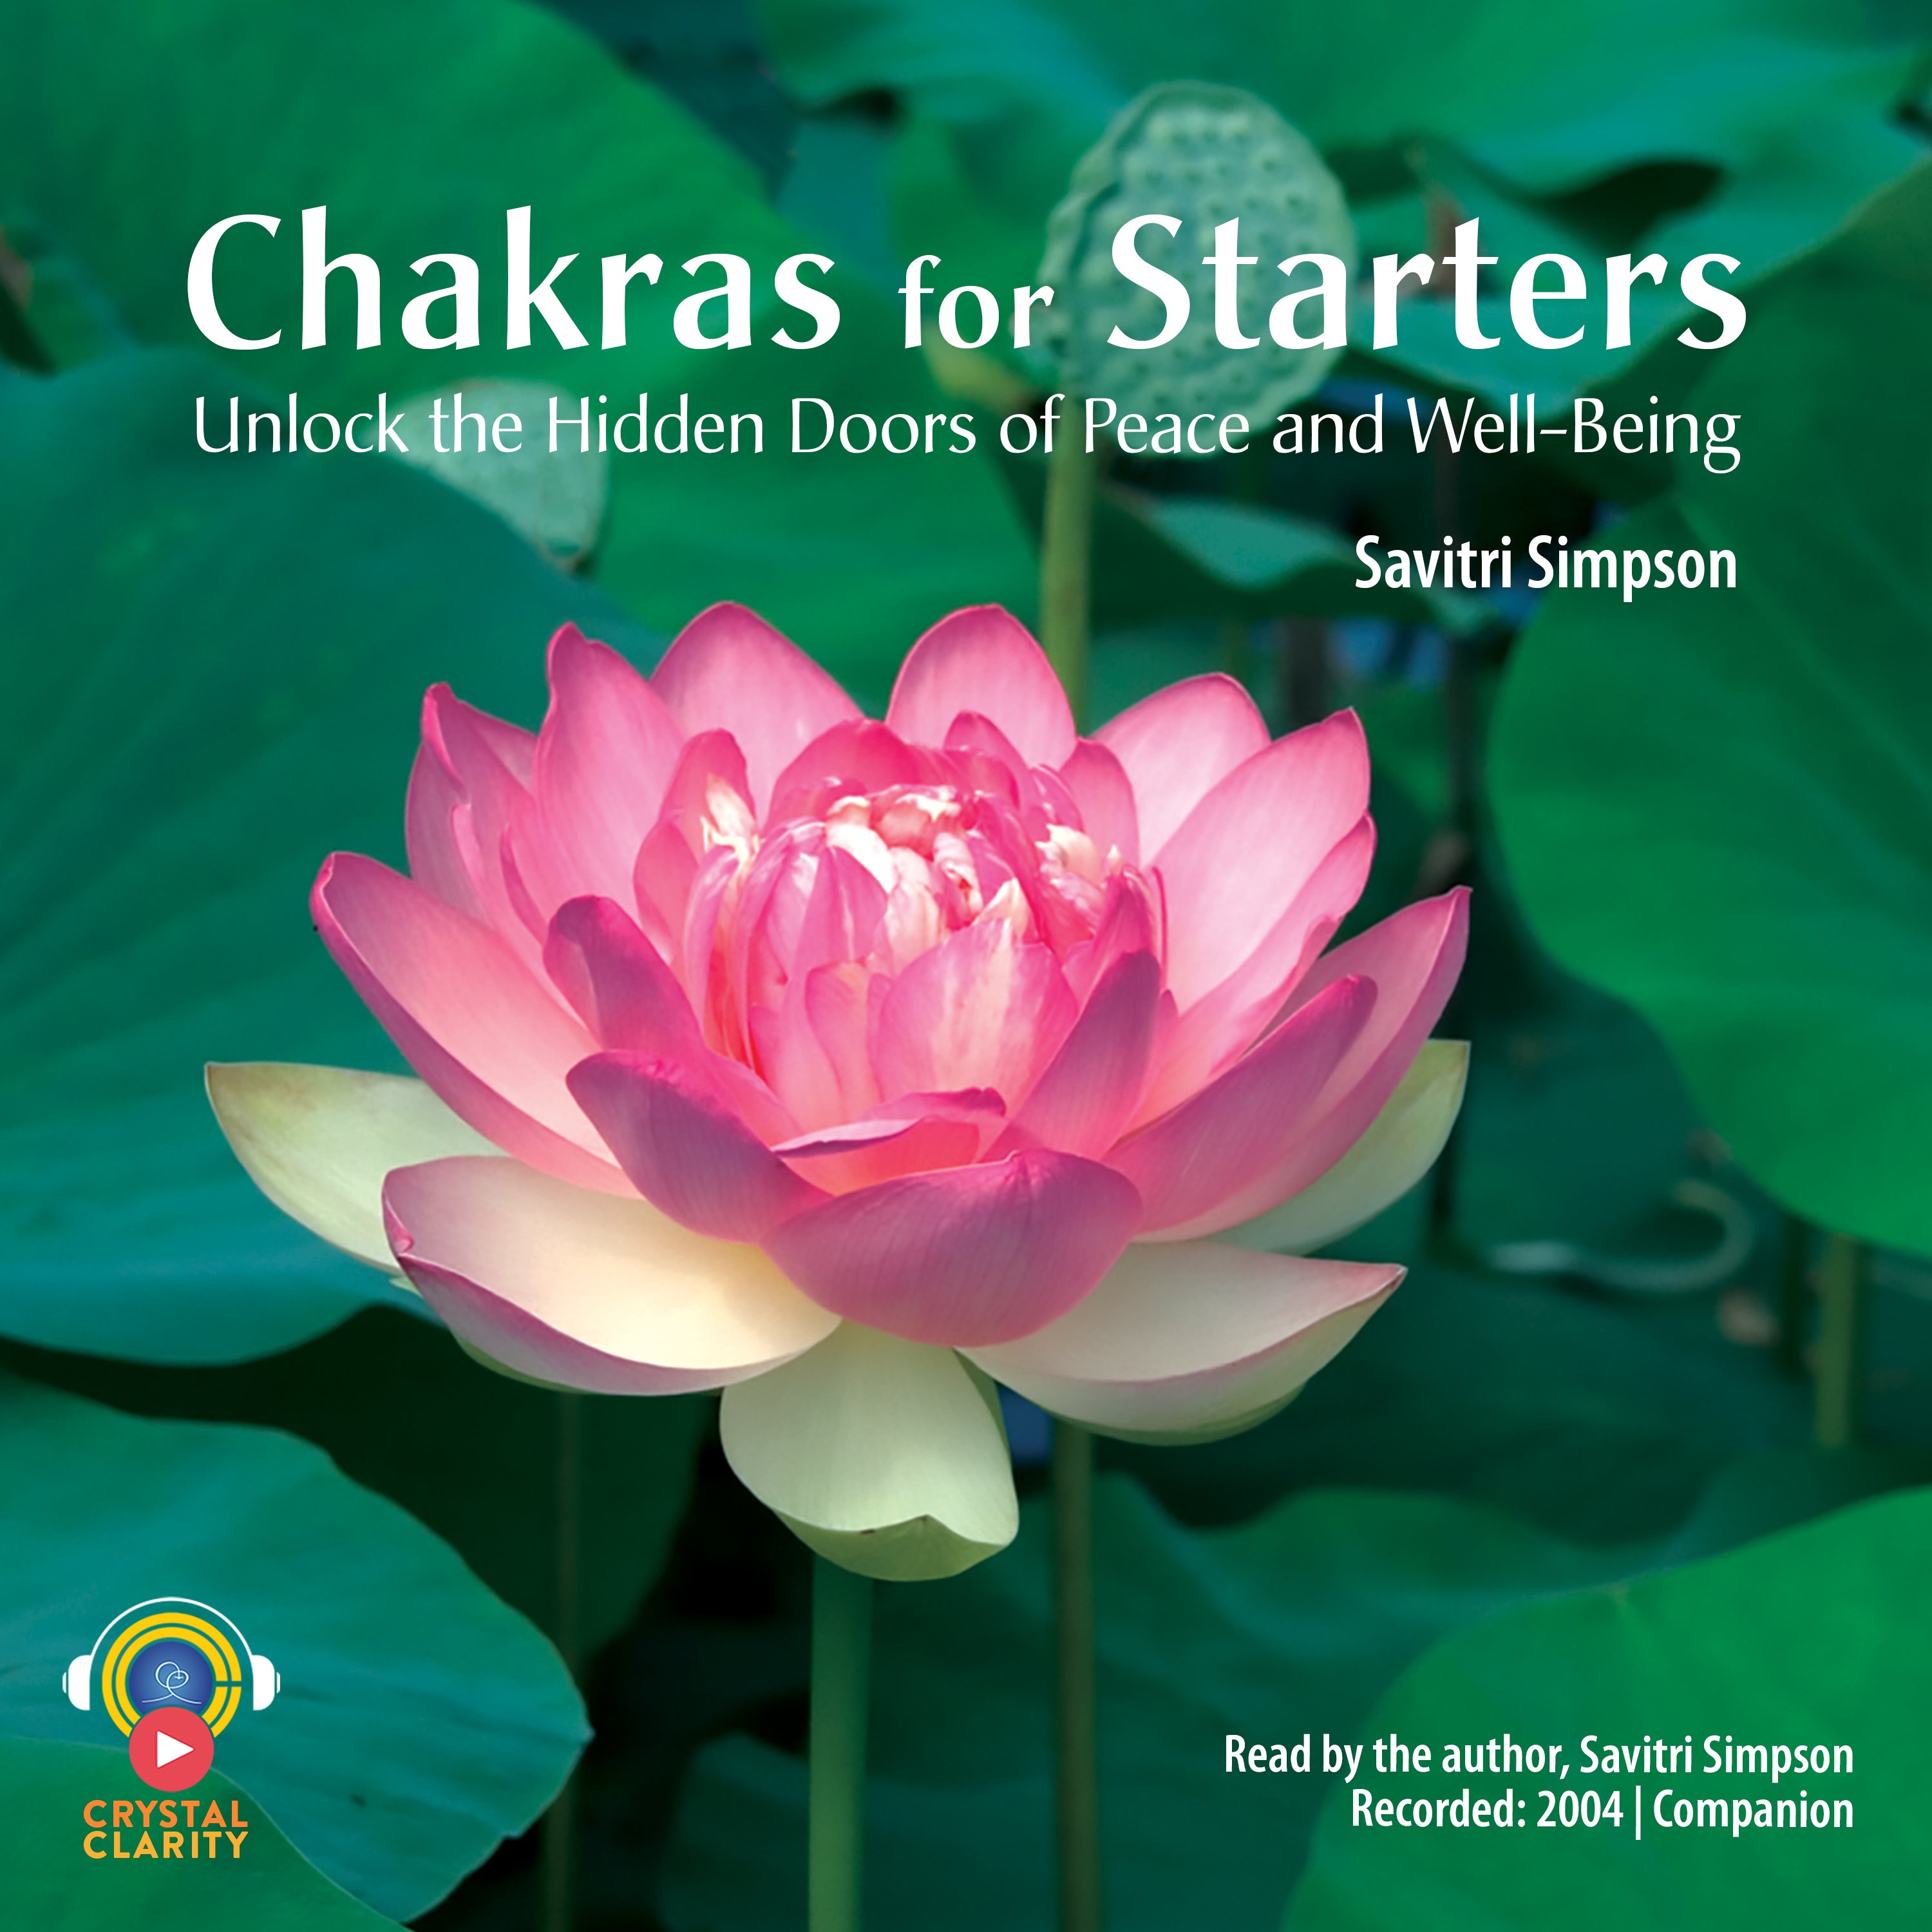 Chakras for Starters: Audio Companion to the Book (MP3)